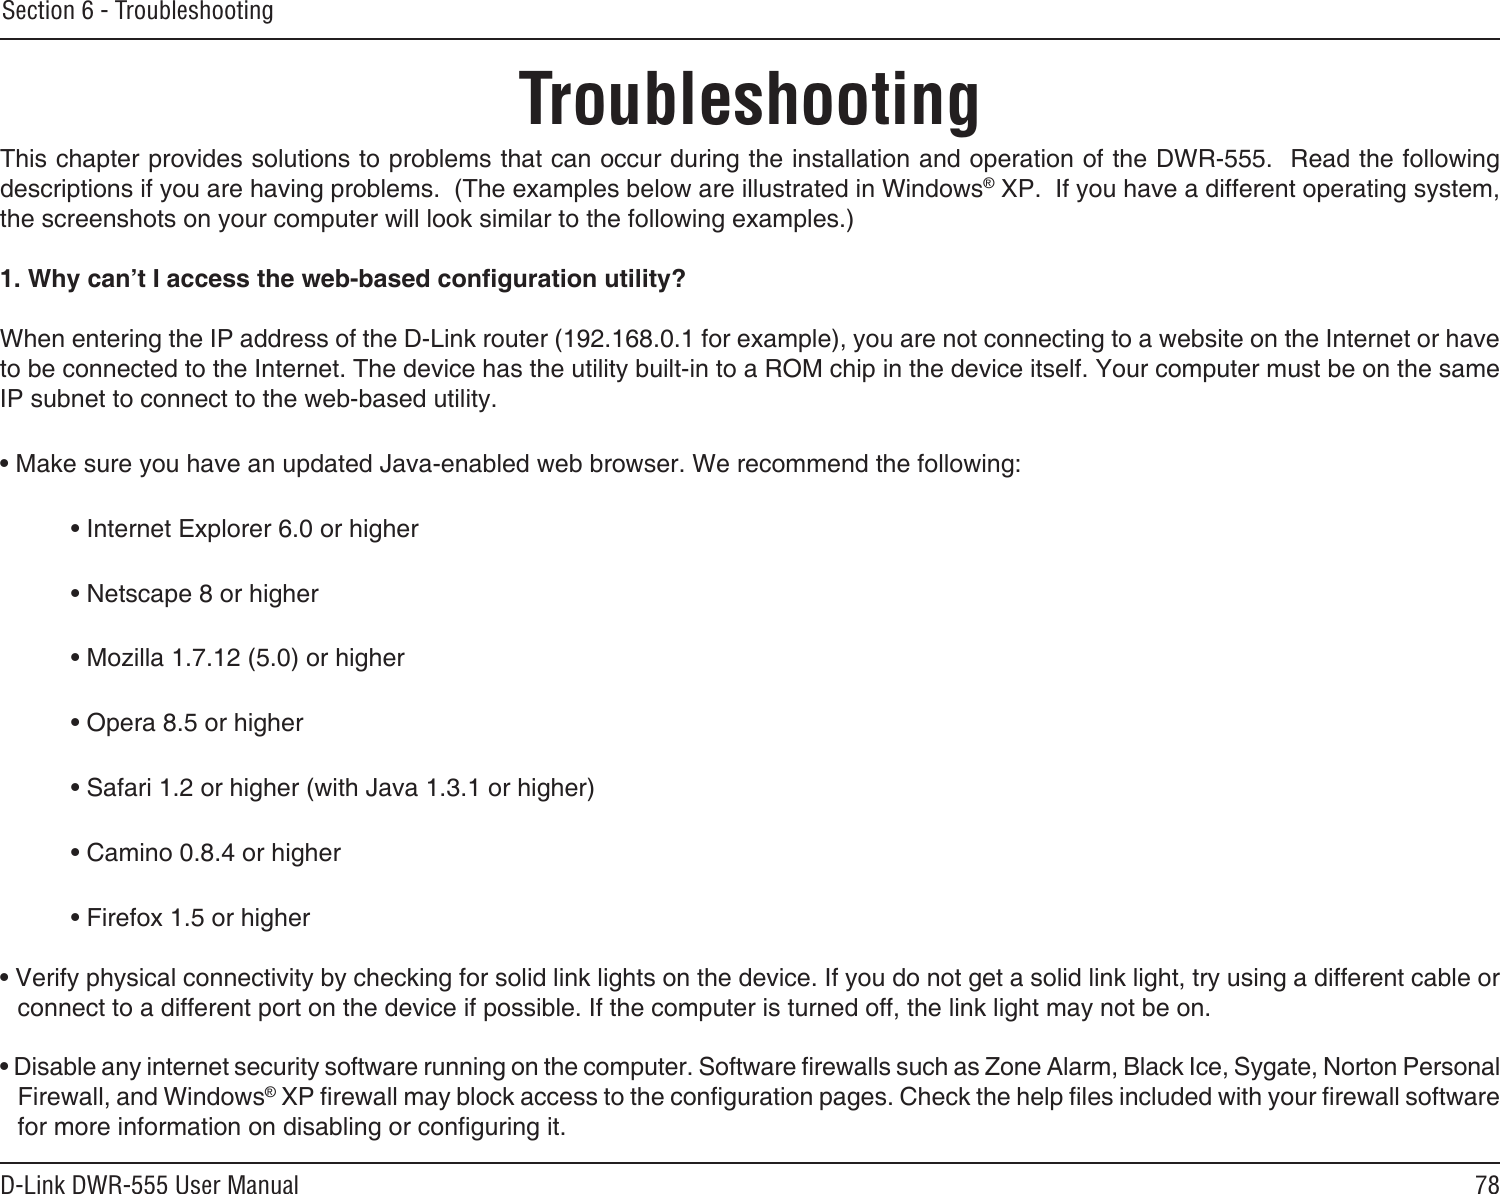 78D-Link DWR-555 User ManualSection 6 - TroubleshootingTroubleshootingThis chapter provides solutions to problems that can occur during the installation and operation of the DWR-555.  Read the following descriptions if you are having problems.  (The examples below are illustrated in Windows® XP.  If you have a different operating system, the screenshots on your computer will look similar to the following examples.)1. Why can’t I access the web-based conguration utility?When entering the IP address of the D-Link router (192.168.0.1 for example), you are not connecting to a website on the Internet or have to be connected to the Internet. The device has the utility built-in to a ROM chip in the device itself. Your computer must be on the same IP subnet to connect to the web-based utility. • Make sure you have an updated Java-enabled web browser. We recommend the following: • Internet Explorer 6.0 or higher • Netscape 8 or higher • Mozilla 1.7.12 (5.0) or higher • Opera 8.5 or higher • Safari 1.2 or higher (with Java 1.3.1 or higher) • Camino 0.8.4 or higher • Firefox 1.5 or higher • Verify physical connectivity by checking for solid link lights on the device. If you do not get a solid link light, try using a different cable or connect to a different port on the device if possible. If the computer is turned off, the link light may not be on.• Disable any internet security software running on the computer. Software rewalls such as Zone Alarm, Black Ice, Sygate, Norton Personal Firewall, and Windows® XP rewall may block access to the conguration pages. Check the help les included with your rewall software for more information on disabling or conguring it.